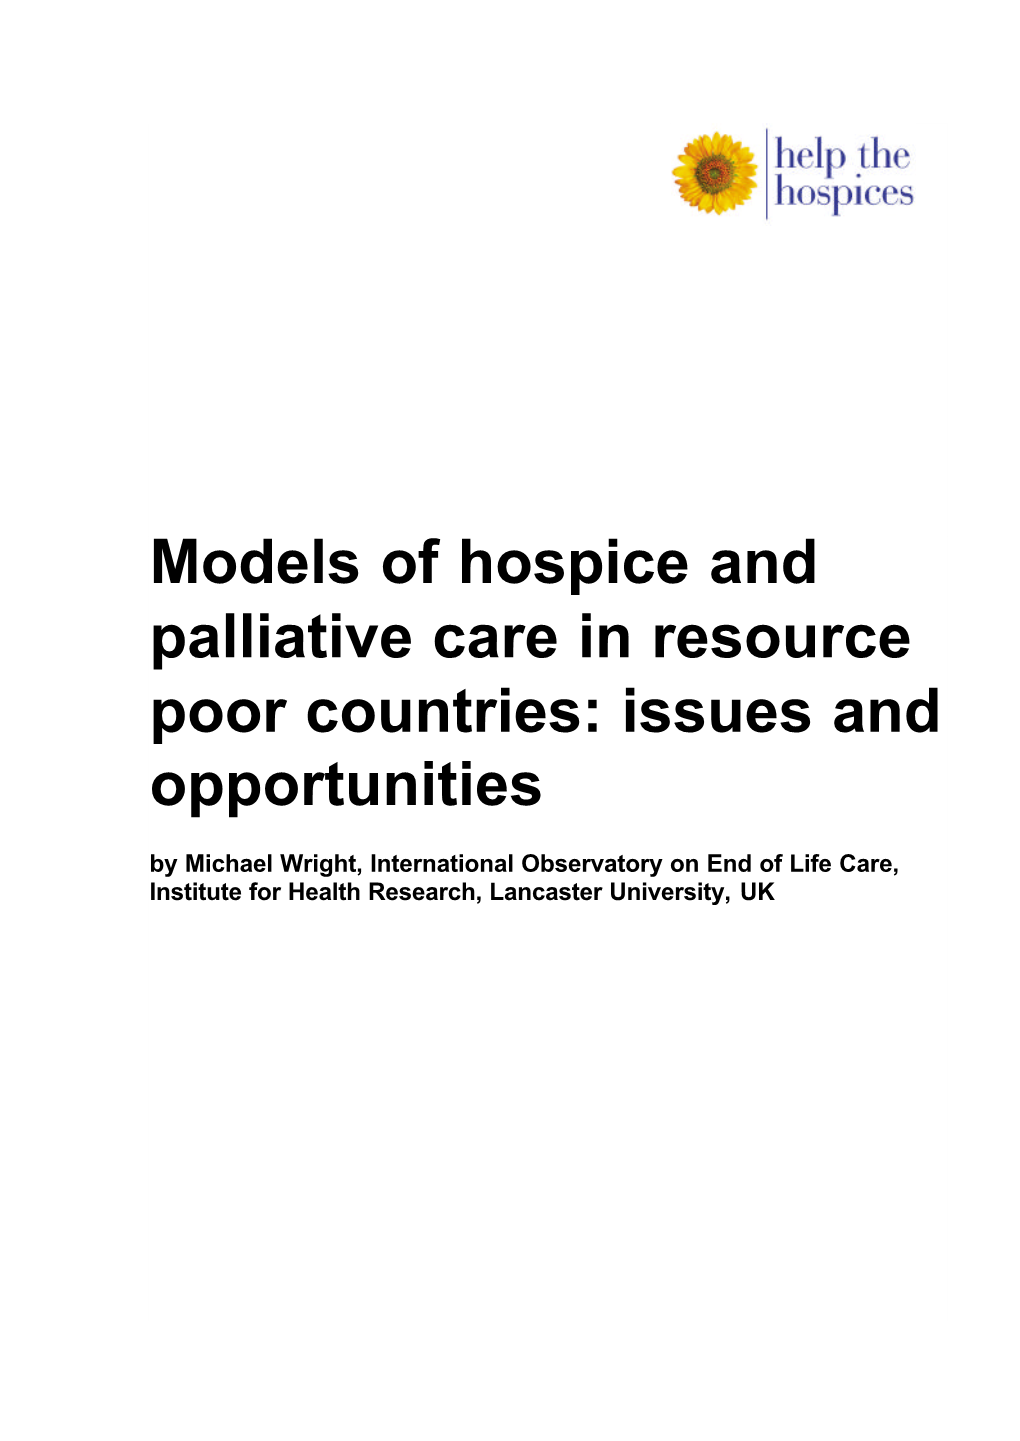 Models of Hospice and Palliative Care in Resource Poor Countries